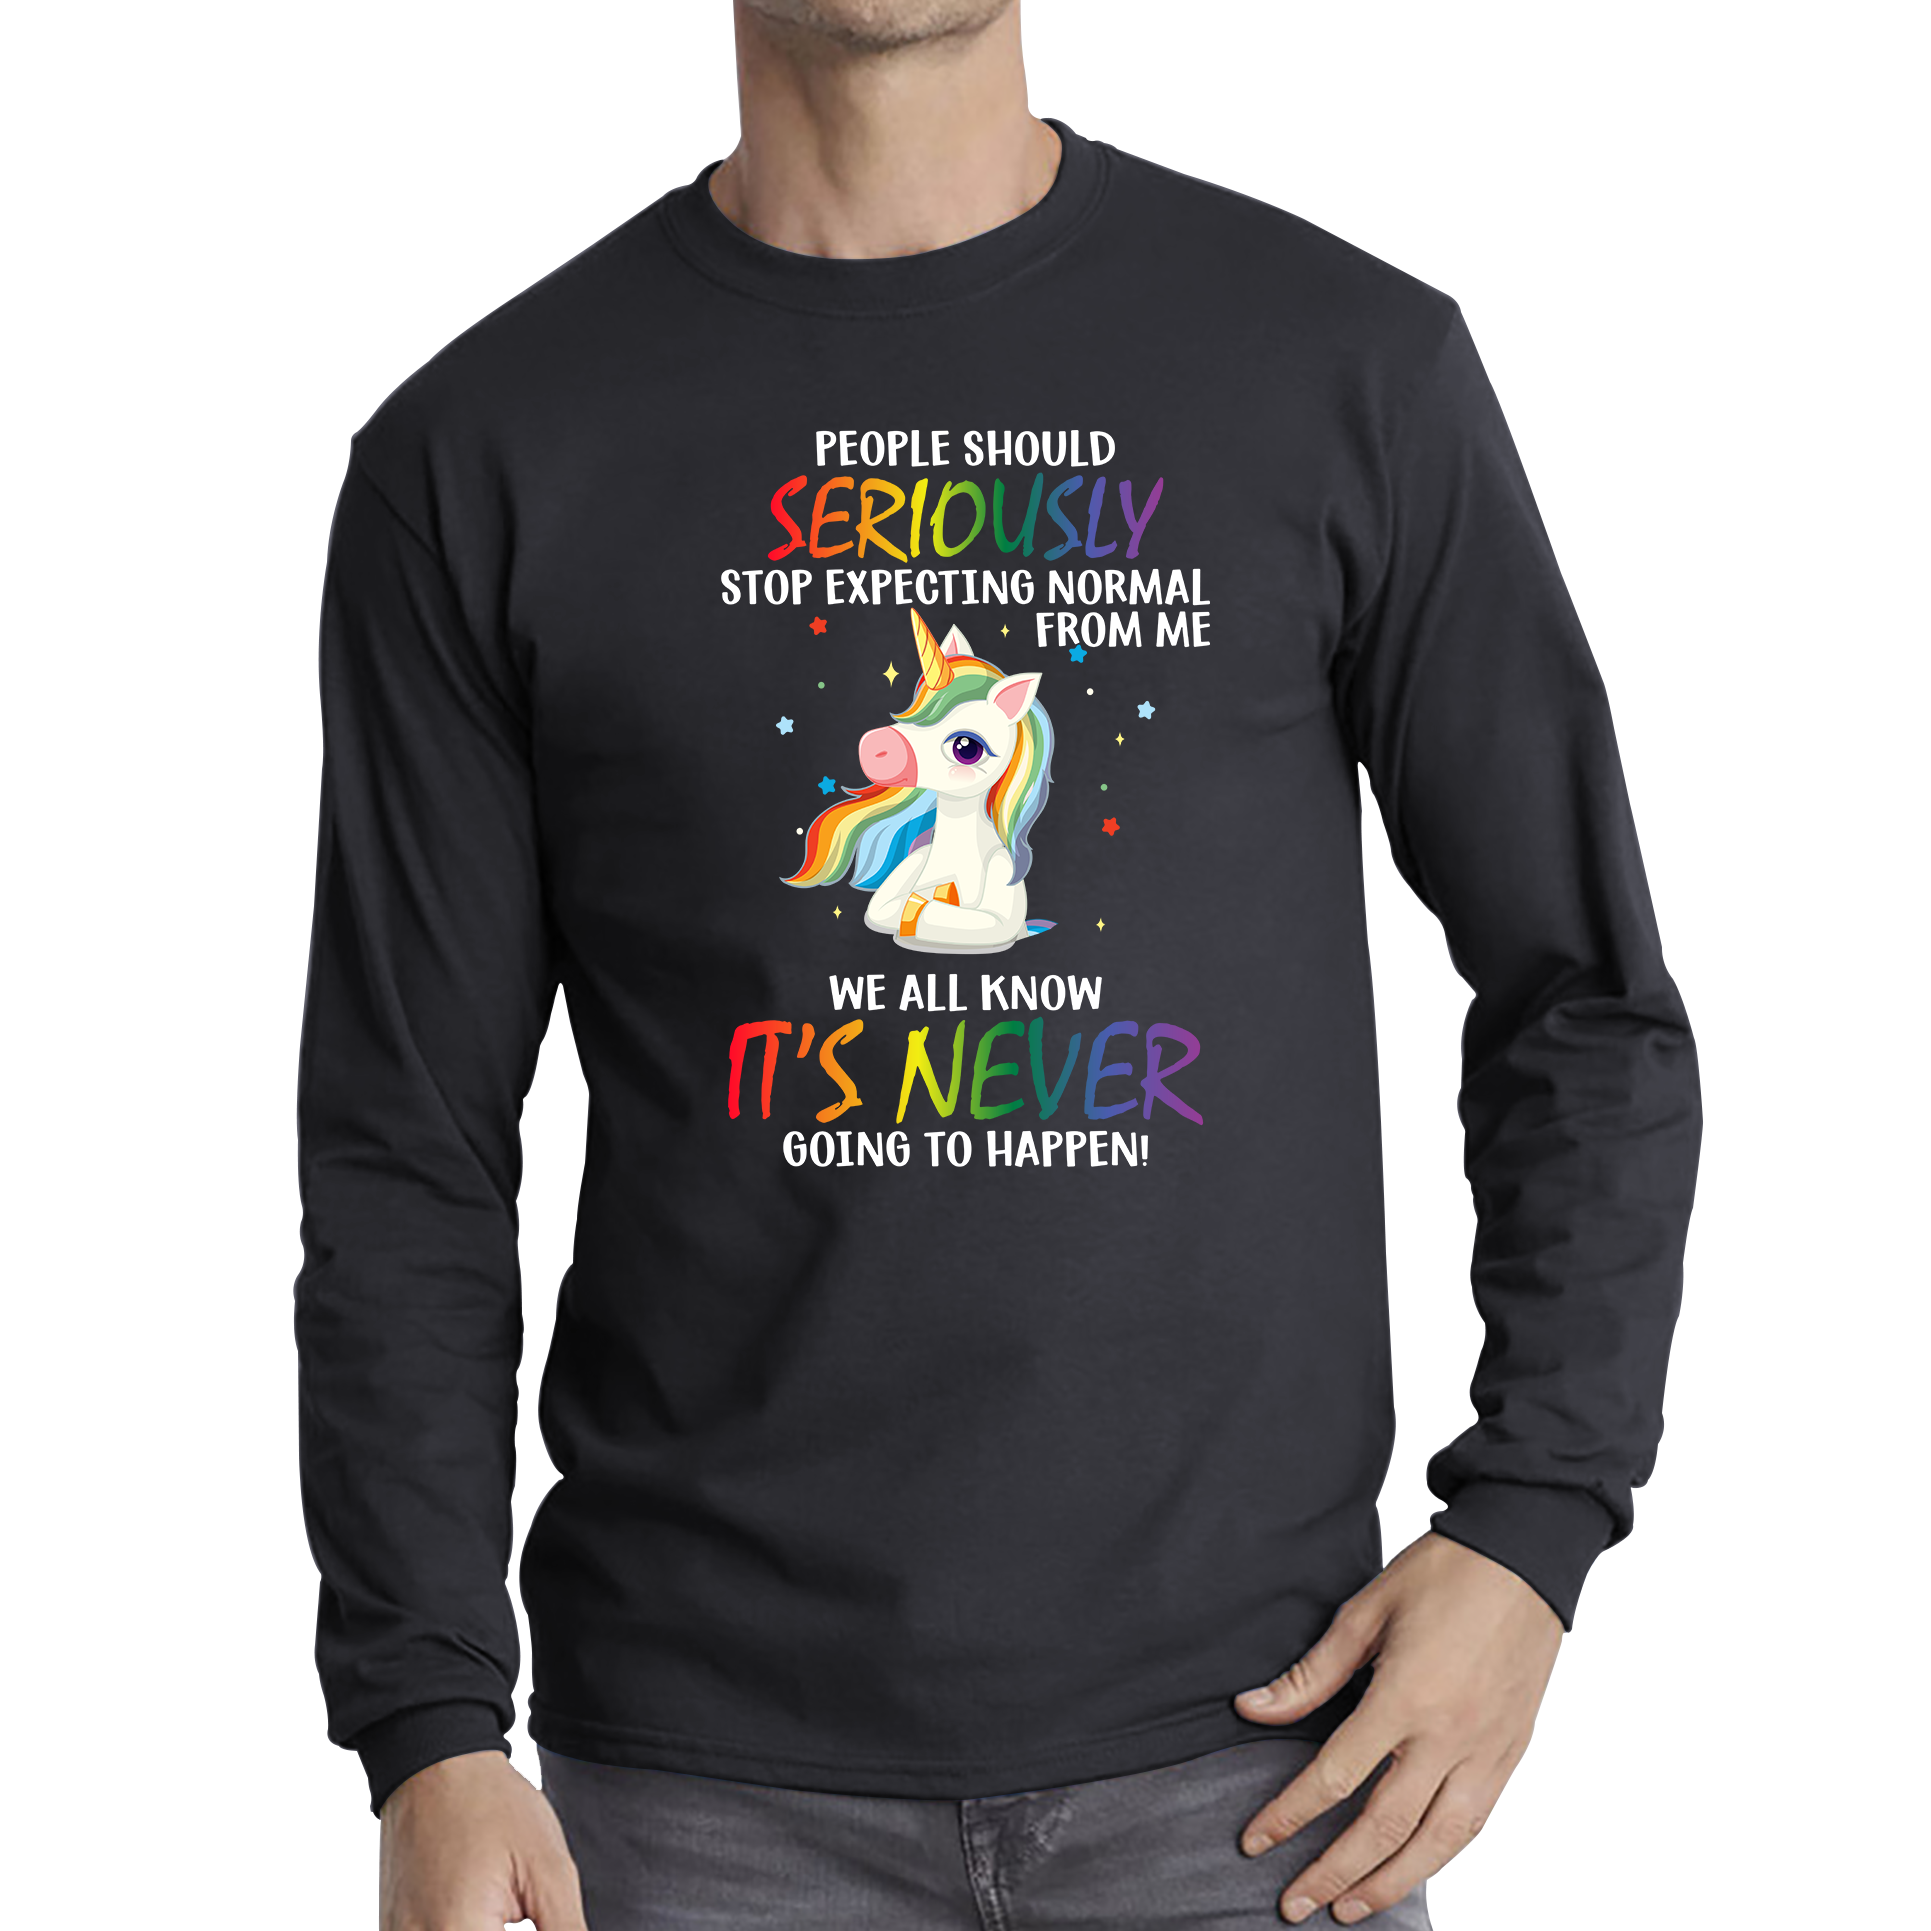 People Should Seriously Stop Expecting Normal From Me Unicorn Horse Shirt Funny Sarcastic Joke Long Sleeve T Shirt